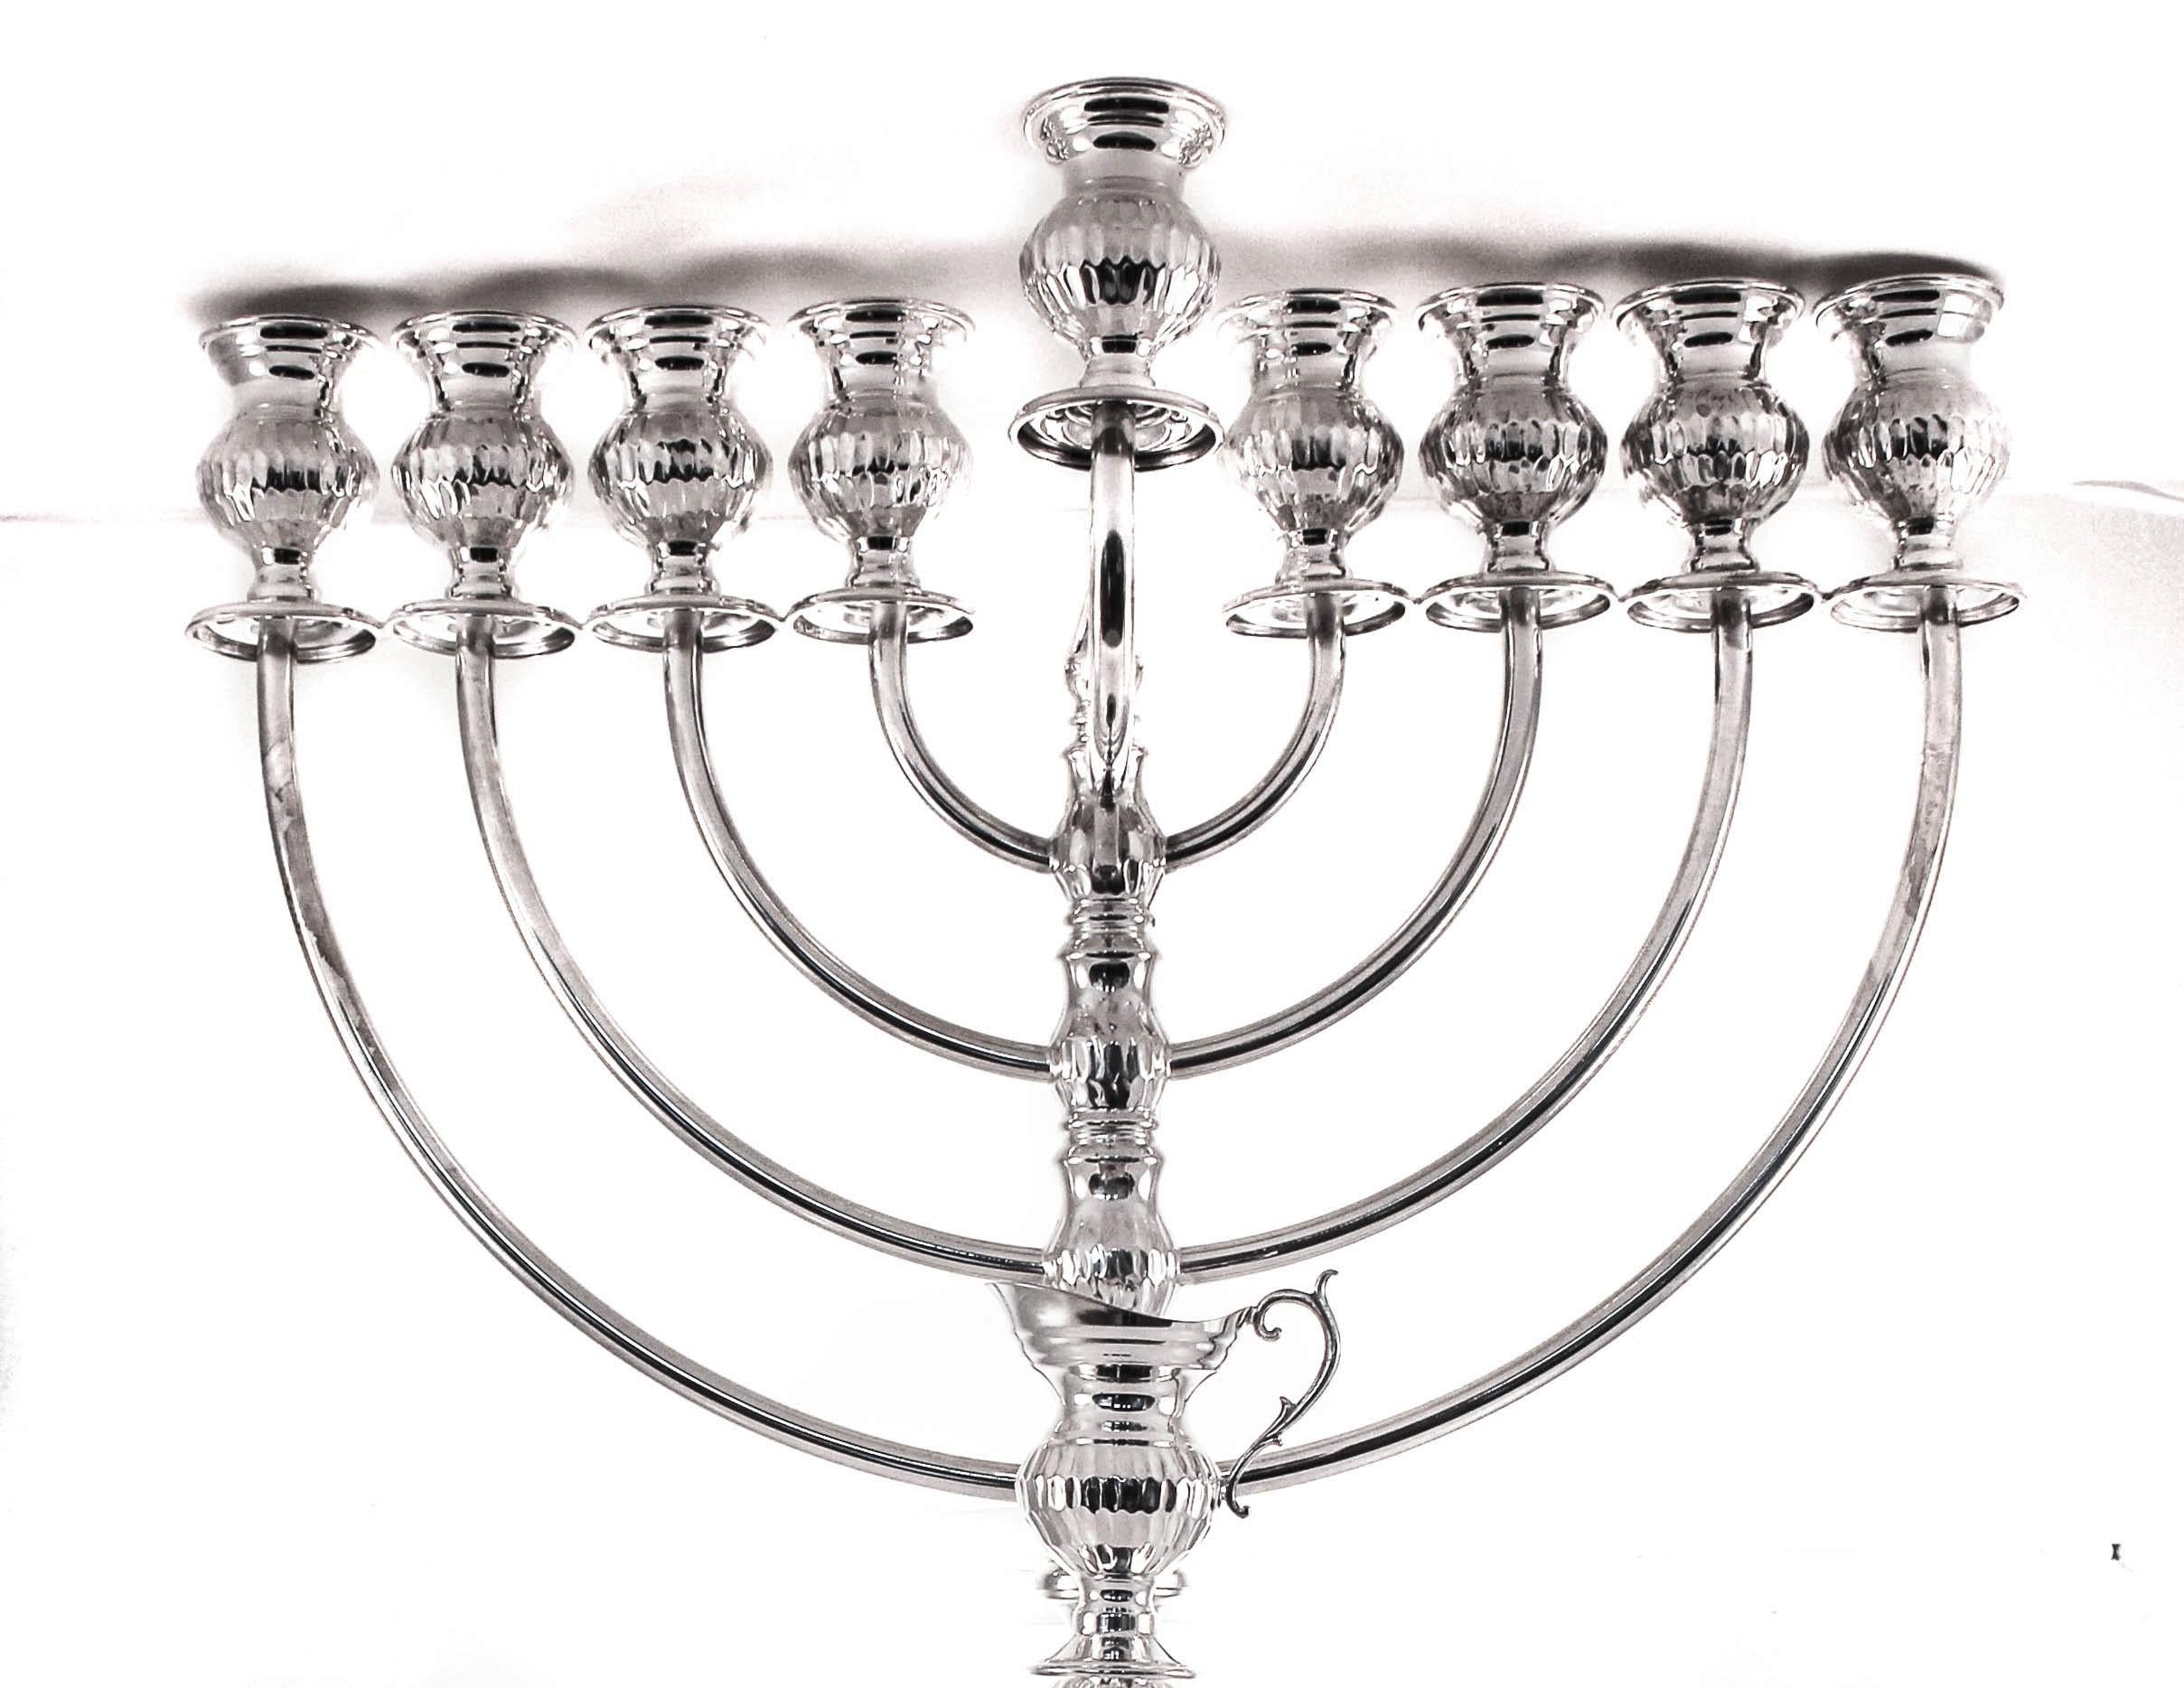 Hanukkah season has passed but it’s not too early to start thinking of next year. A sterling silver menorah becomes a family heirloom and gets passed down from generation to generation. Display your pride with a menorah that is magnificent. The